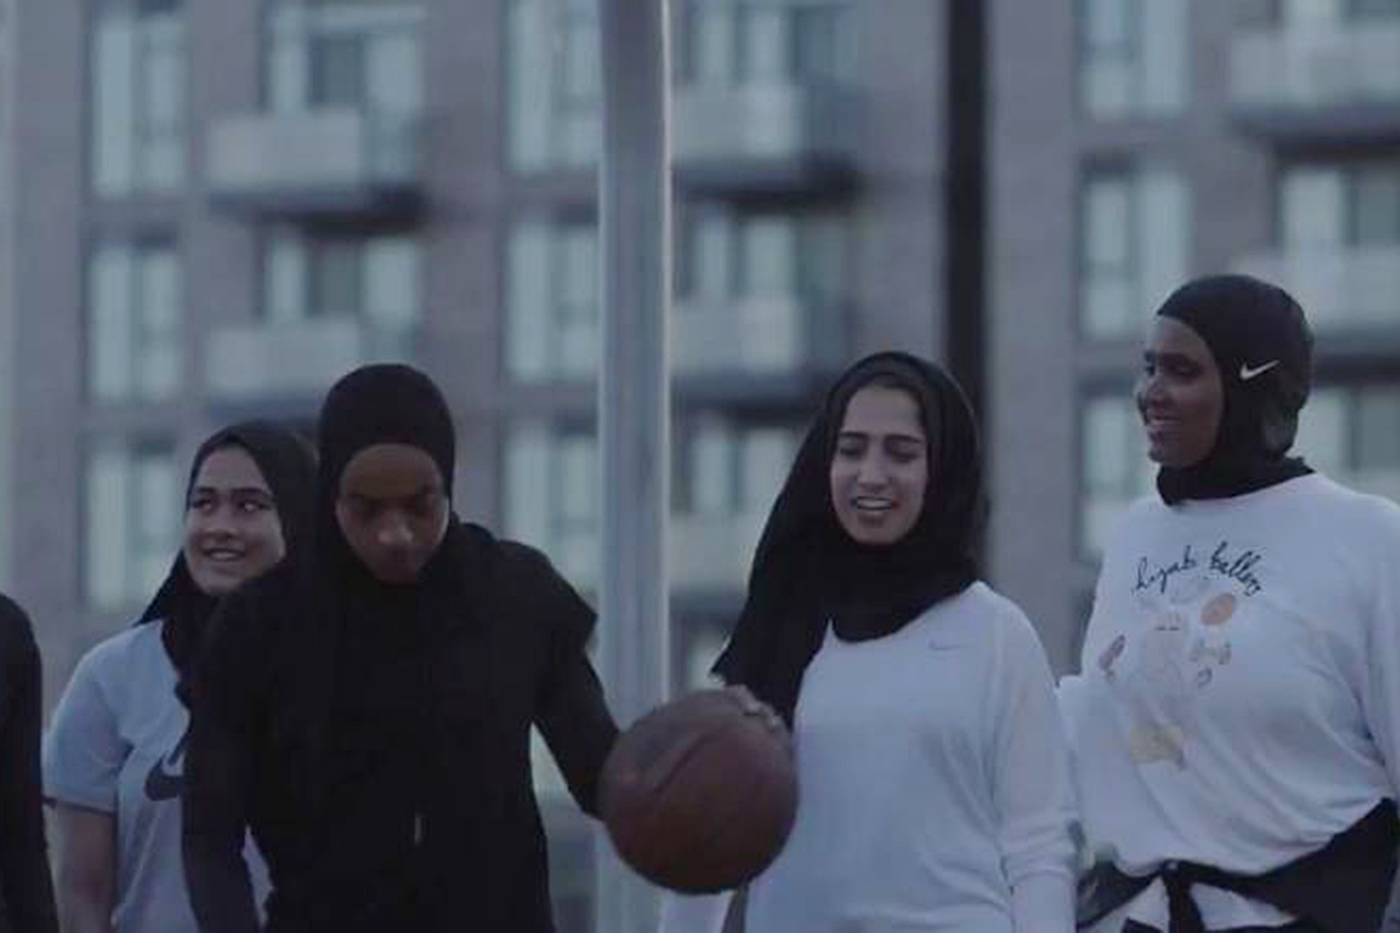 The Toronto Raptors have formed a partnership with Nike to offer team-branded hijabs, which are head coverings worn by some Muslim women. Liz Bucar, a professor of religion at Northeastern who teaches a course on the politics of the veil, says that the new hijabs could help to increase the participation of Muslim women in sports. Photo via Twitter/Toronto Raptors